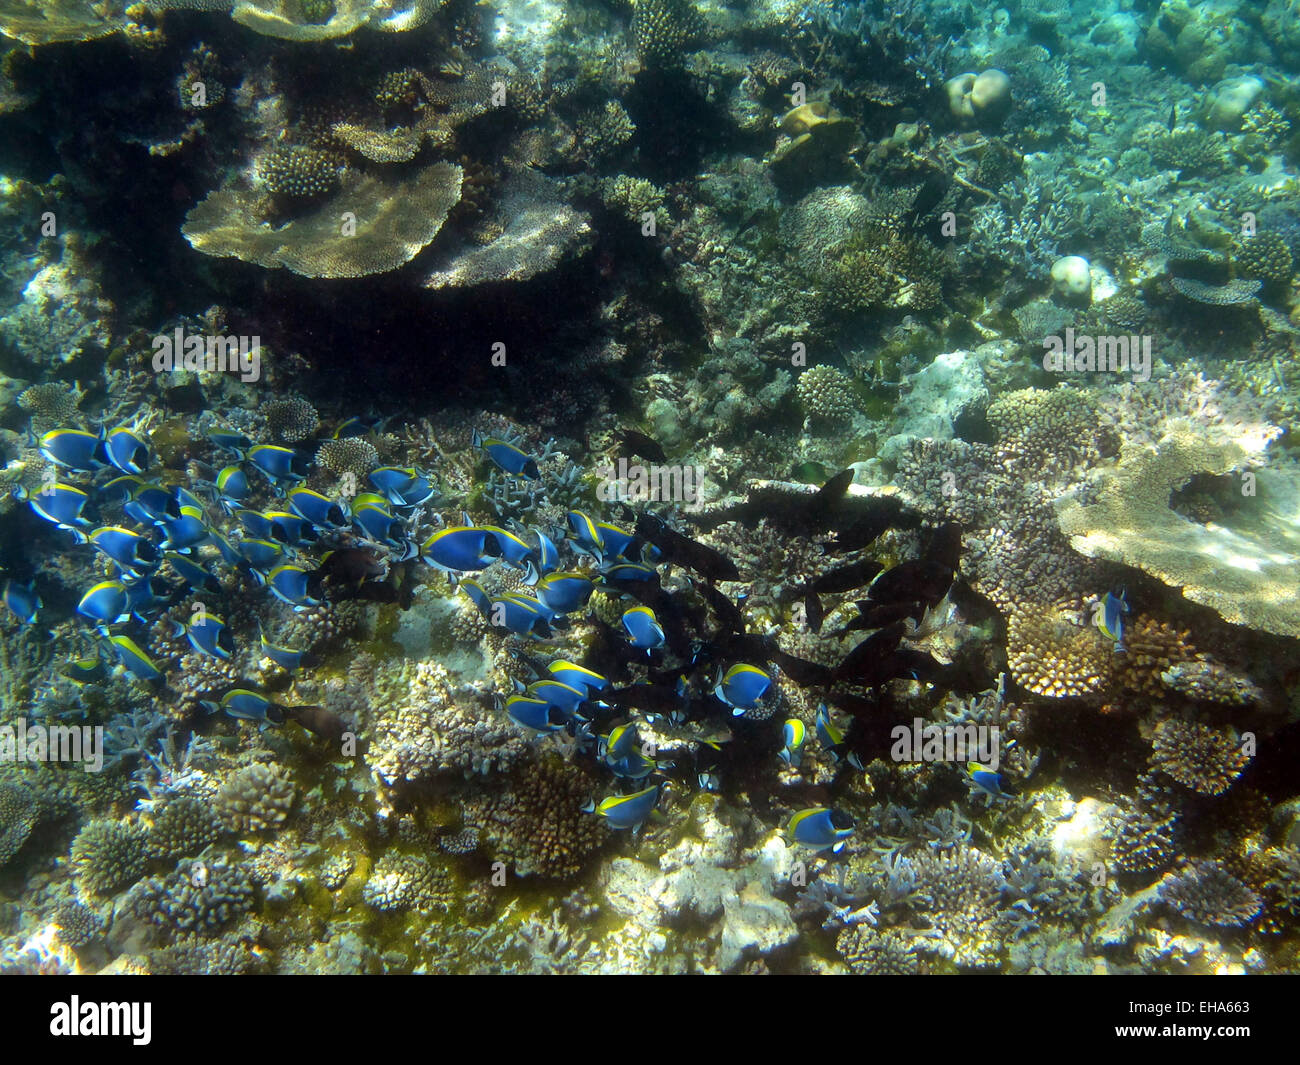 A shoal of Powder-blue, and Eye-stripe (black) Surgeonfish on a coral reef in the Maldives Stock Photo